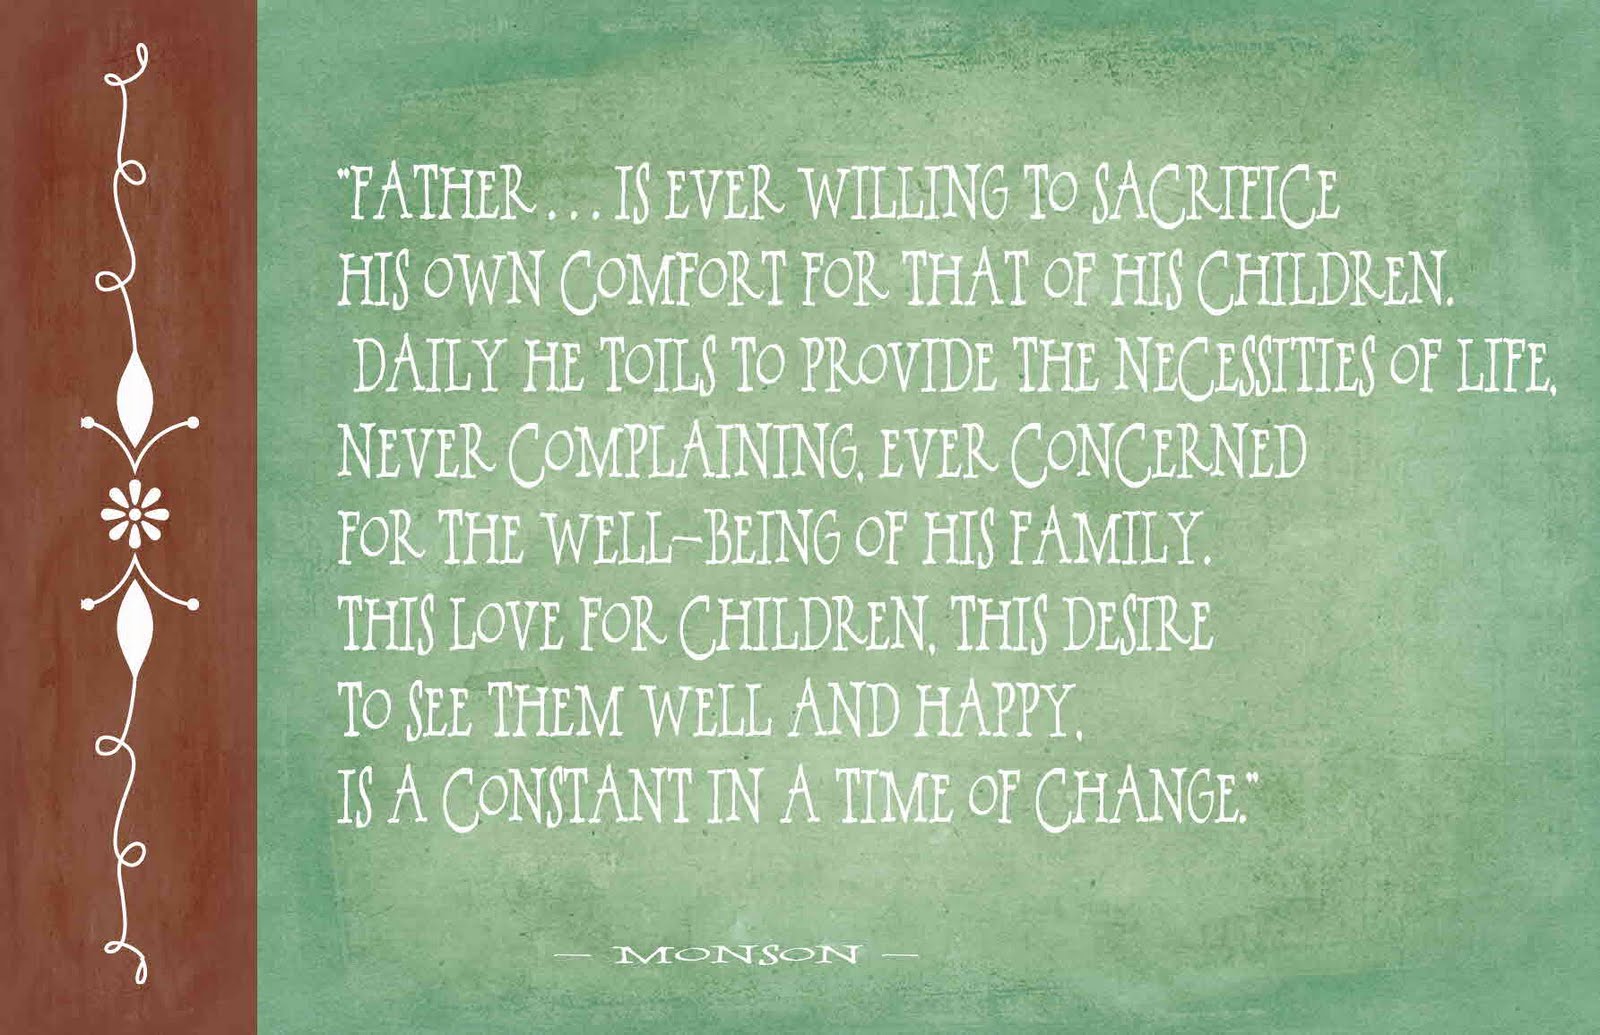 Father is ever willing to sacrifice his own comfort for that of his children. Daily he toils to provide the necessities of life, never complaining, ever concerned for the ... Monson